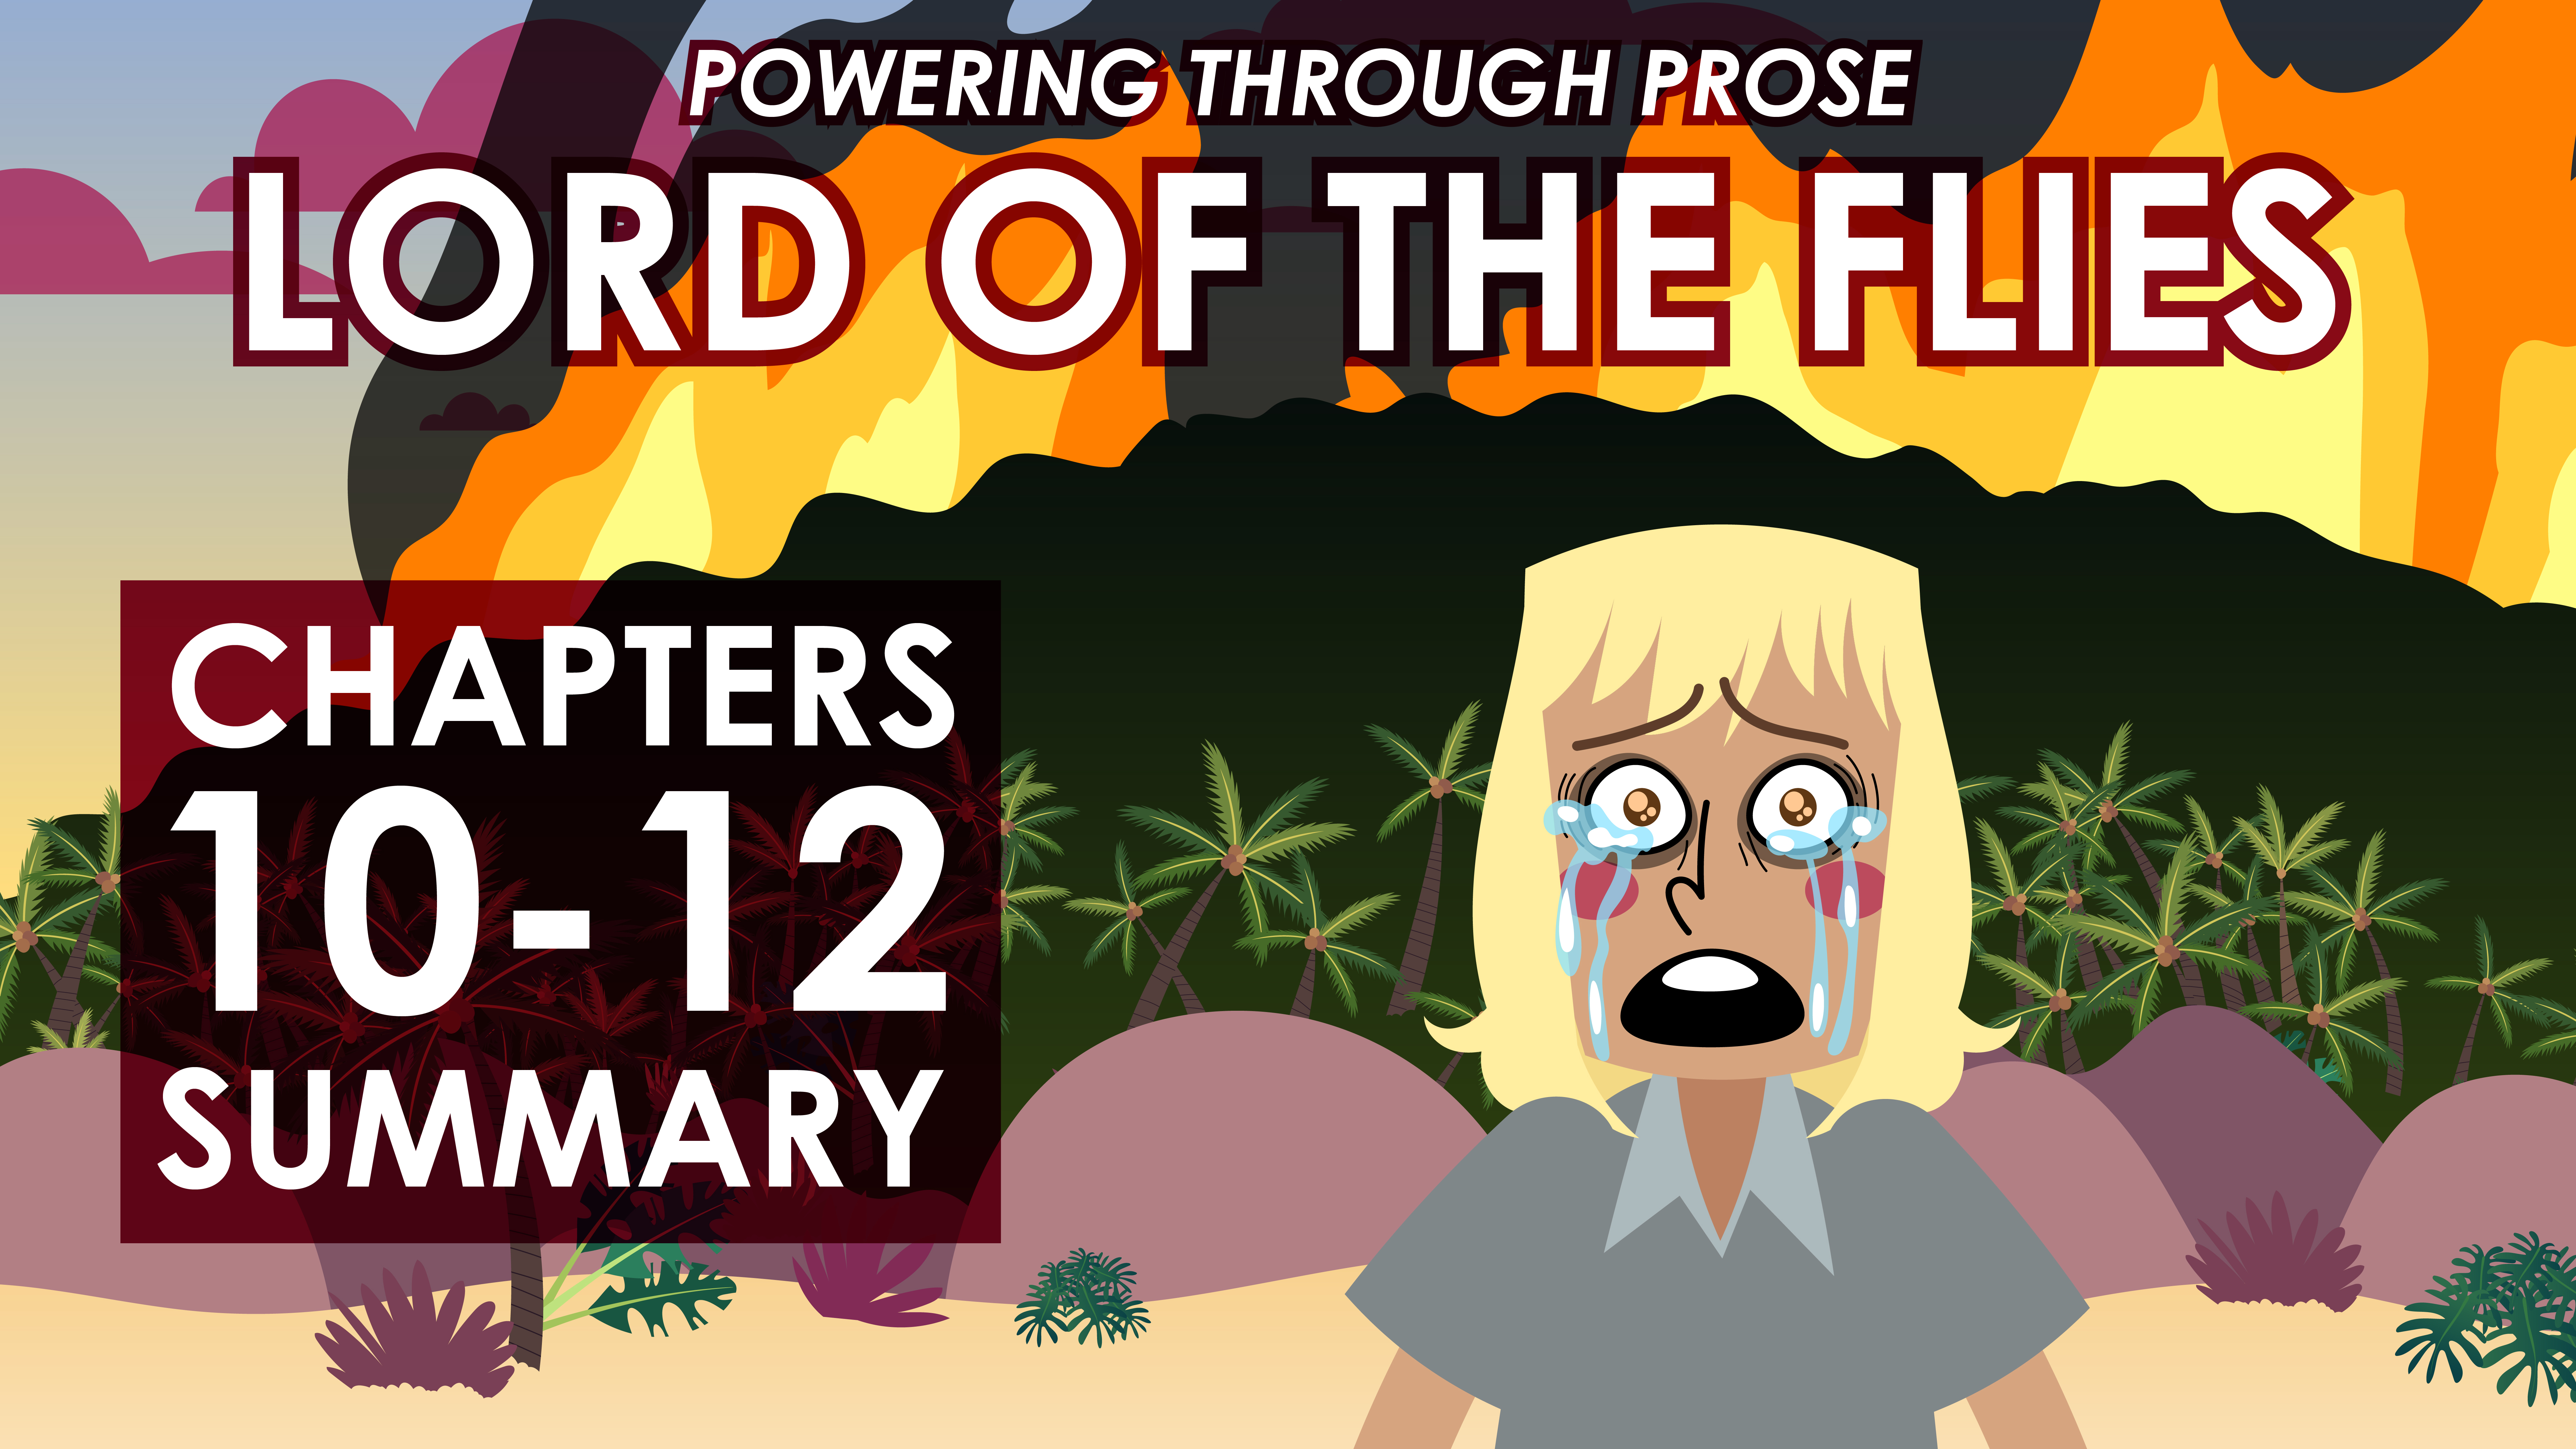 Lord of the Flies - William Golding - Chapters 10-12 Summary - Powering Through Prose Series